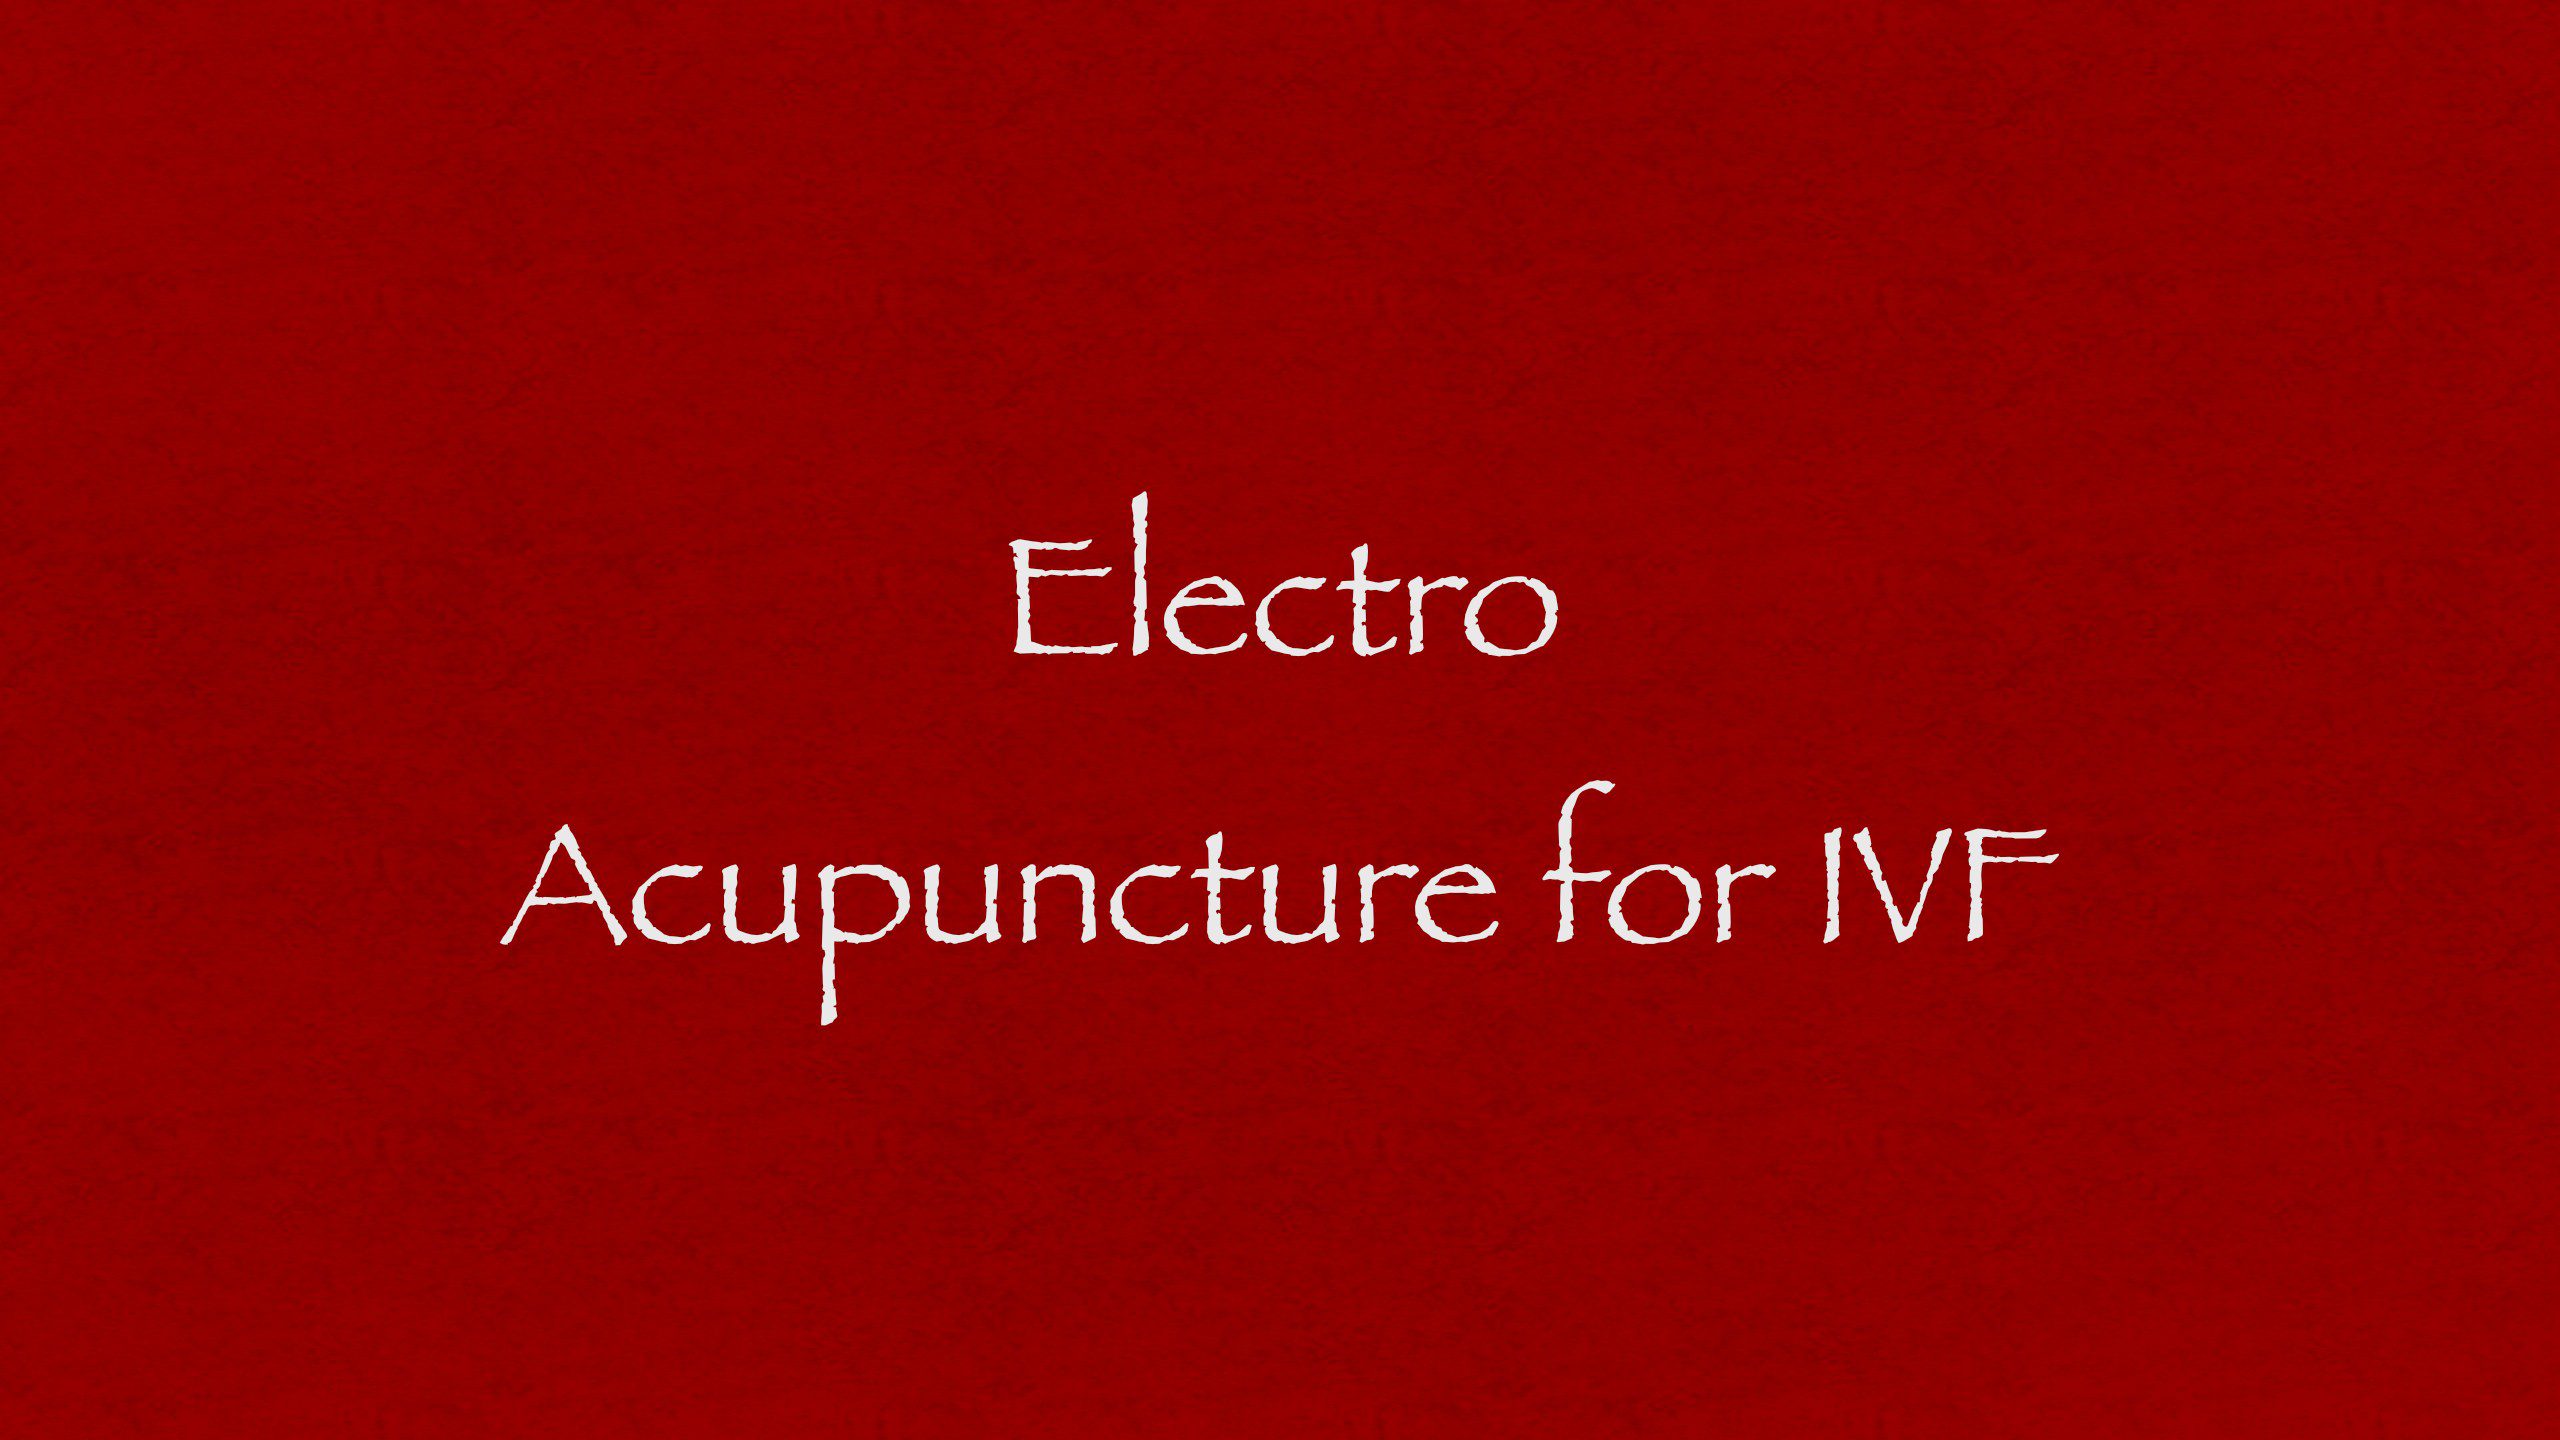 Electro Acupuncture for IVF